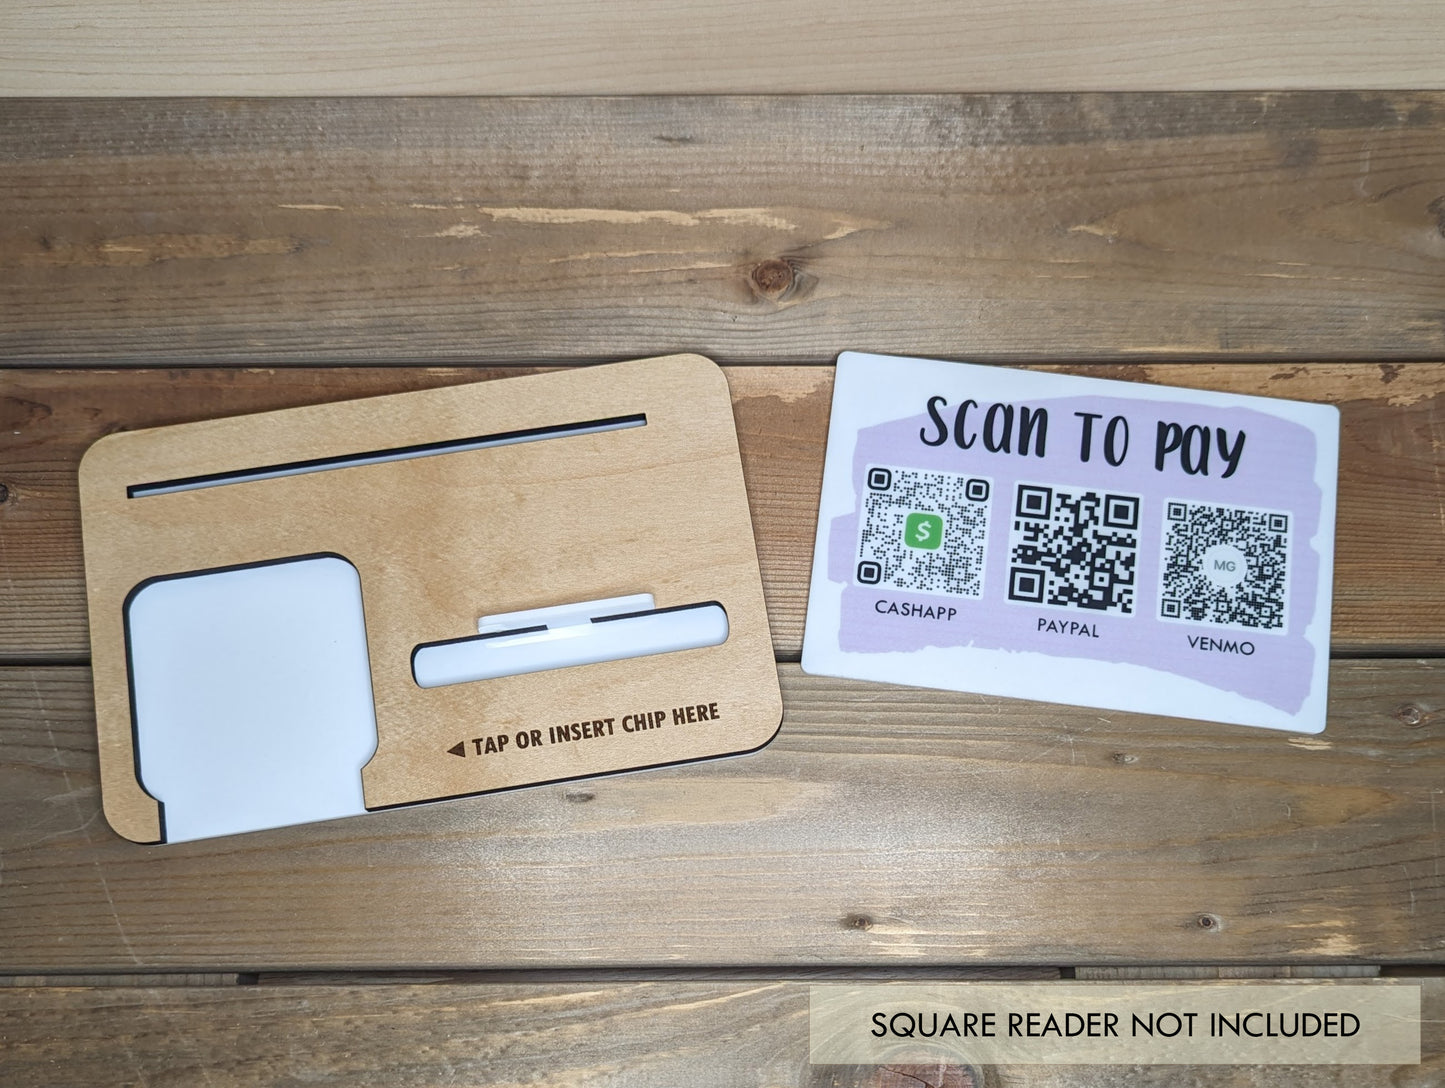 "Scan to Pay" Market Payment Station for Square Reader